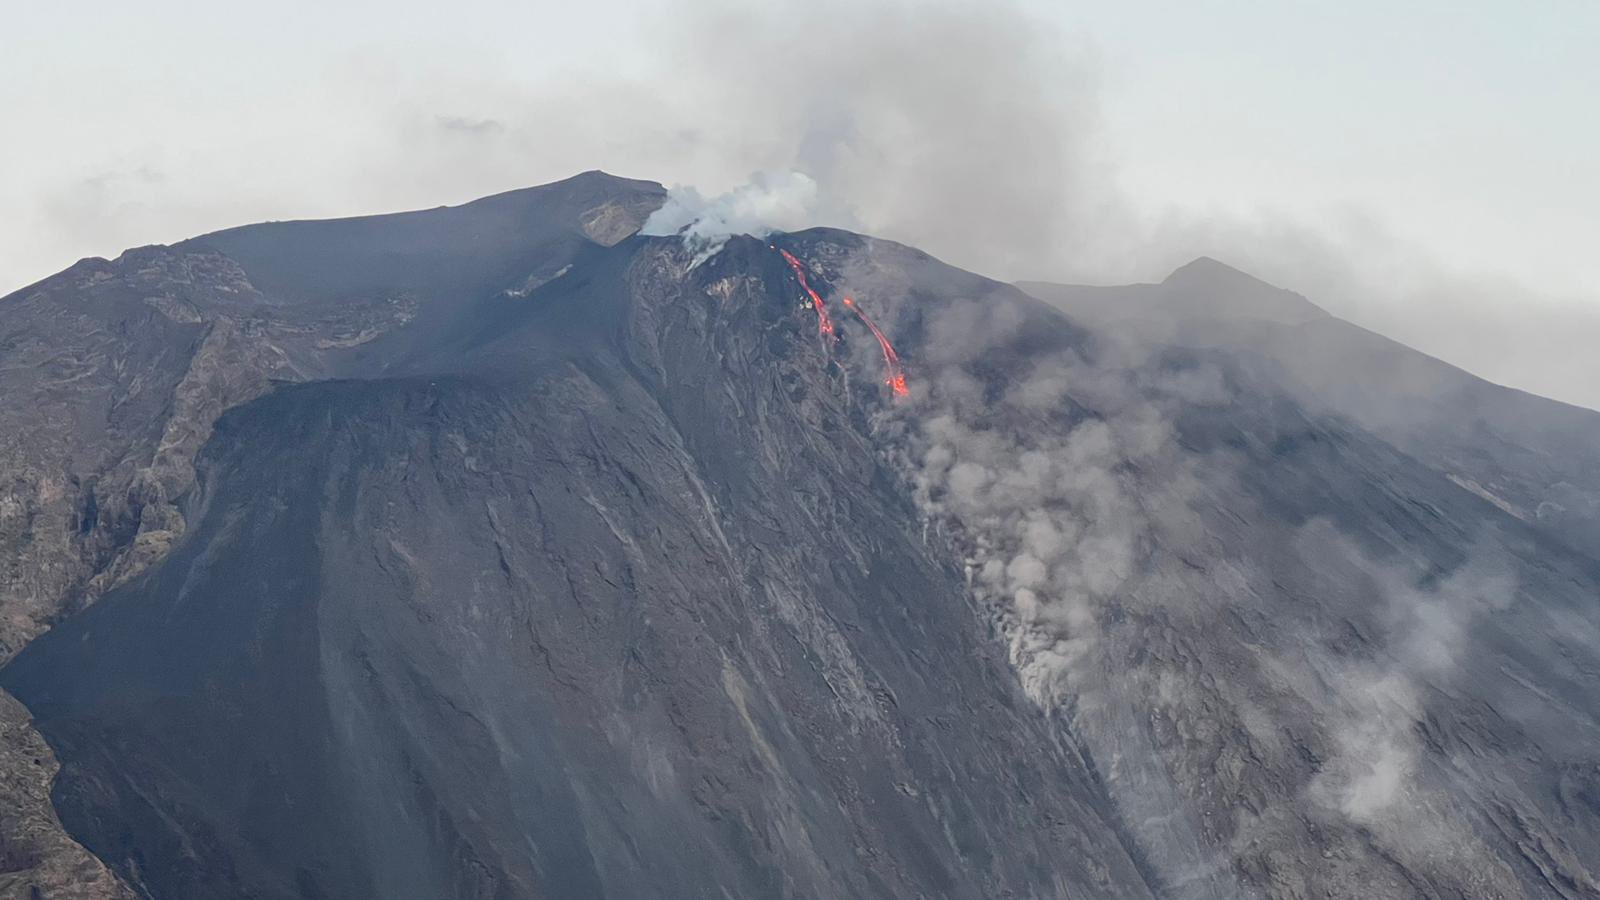 New, short lava flow descending from the N crater area at Stromboli volcano (image: Marco Pistolesi)